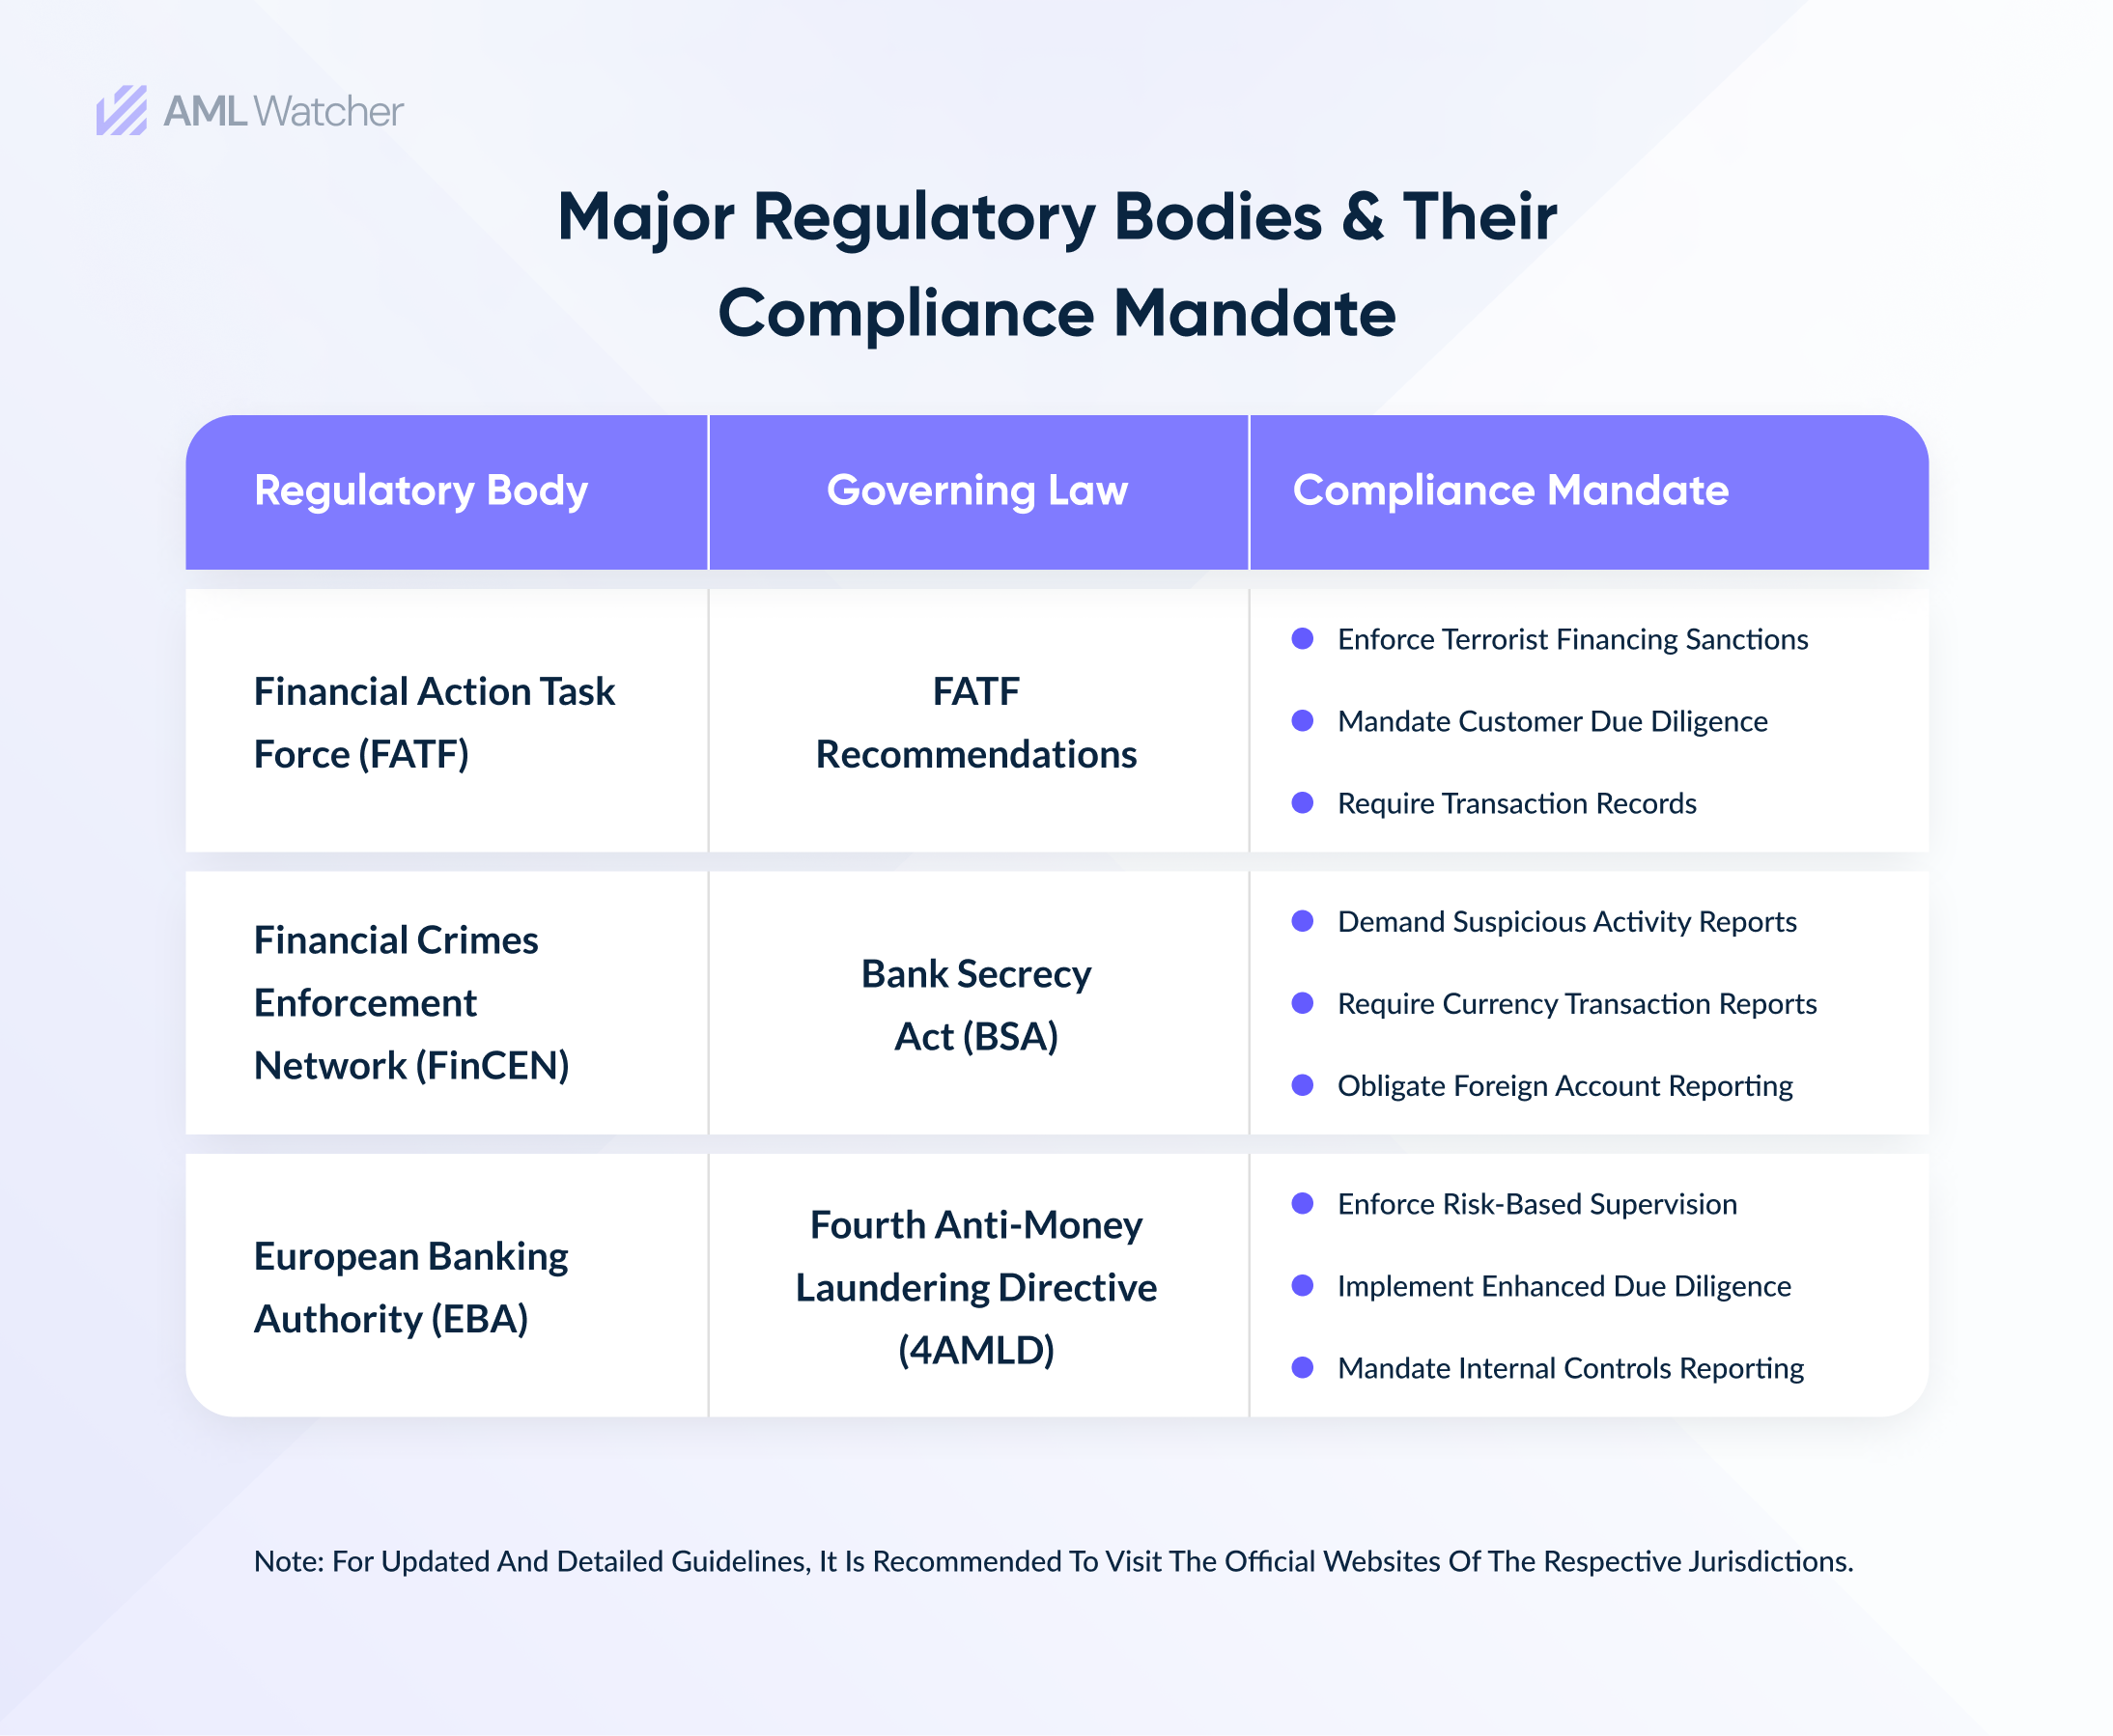 the featured image shows major regulatory bodies and their compliance requirements to fight against money laundering and financing of terrorism.